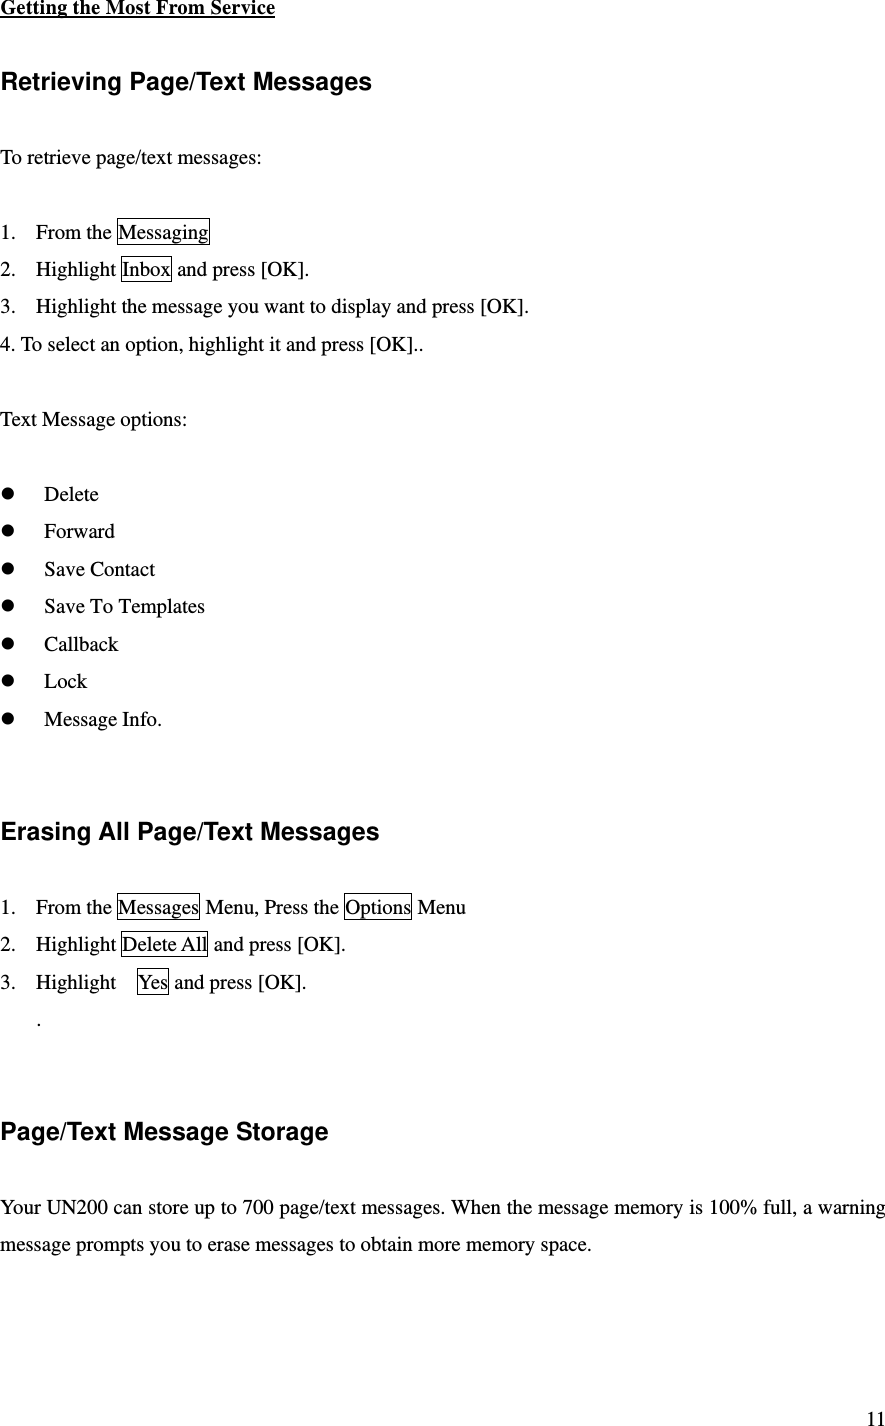 11 Getting the Most From Service  Retrieving Page/Text Messages  To retrieve page/text messages:  1. From the Messaging   2. Highlight Inbox and press [OK].   3. Highlight the message you want to display and press [OK].   4. To select an option, highlight it and press [OK]..  Text Message options:   Delete  Forward  Save Contact  Save To Templates  Callback  Lock  Message Info.   Erasing All Page/Text Messages  1. From the Messages Menu, Press the Options Menu 2. Highlight Delete All and press [OK]. 3. Highlight    Yes and press [OK]. .   Page/Text Message Storage  Your UN200 can store up to 700 page/text messages. When the message memory is 100% full, a warning message prompts you to erase messages to obtain more memory space.   